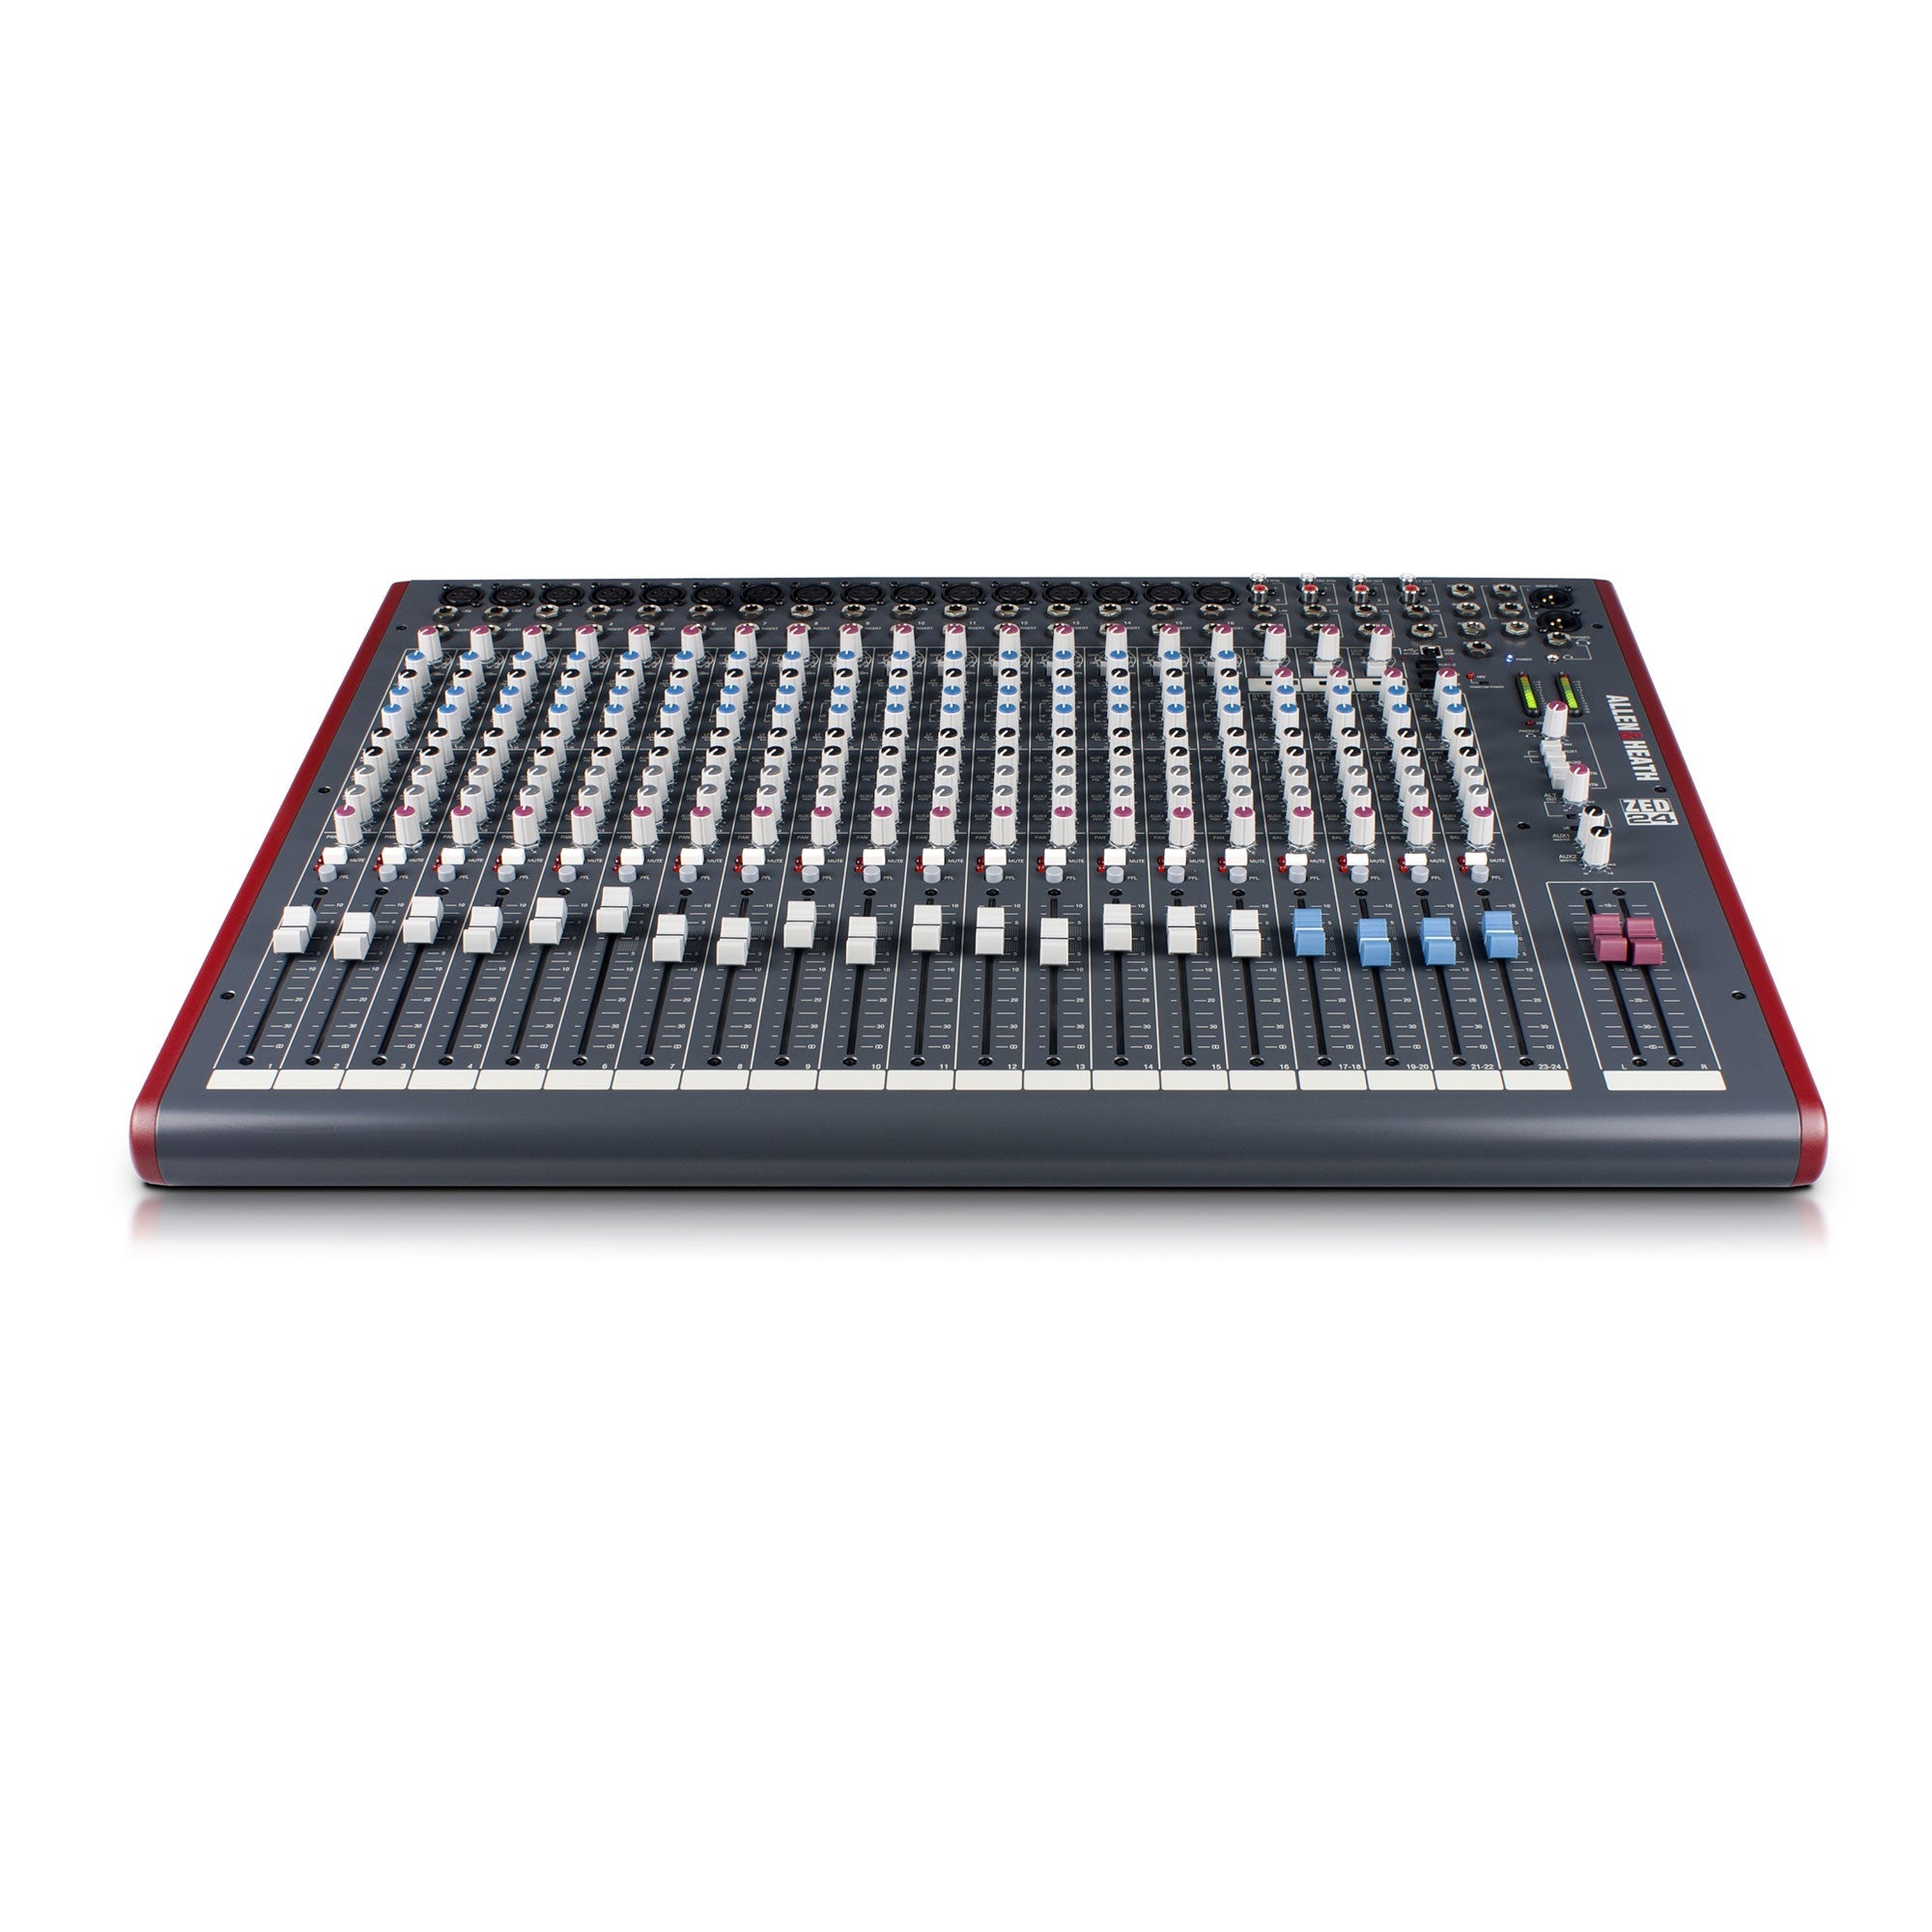 ZED 24 16 Mic/Line 4 Stereo 4 Aux Sends 100mm Faders USB Mix